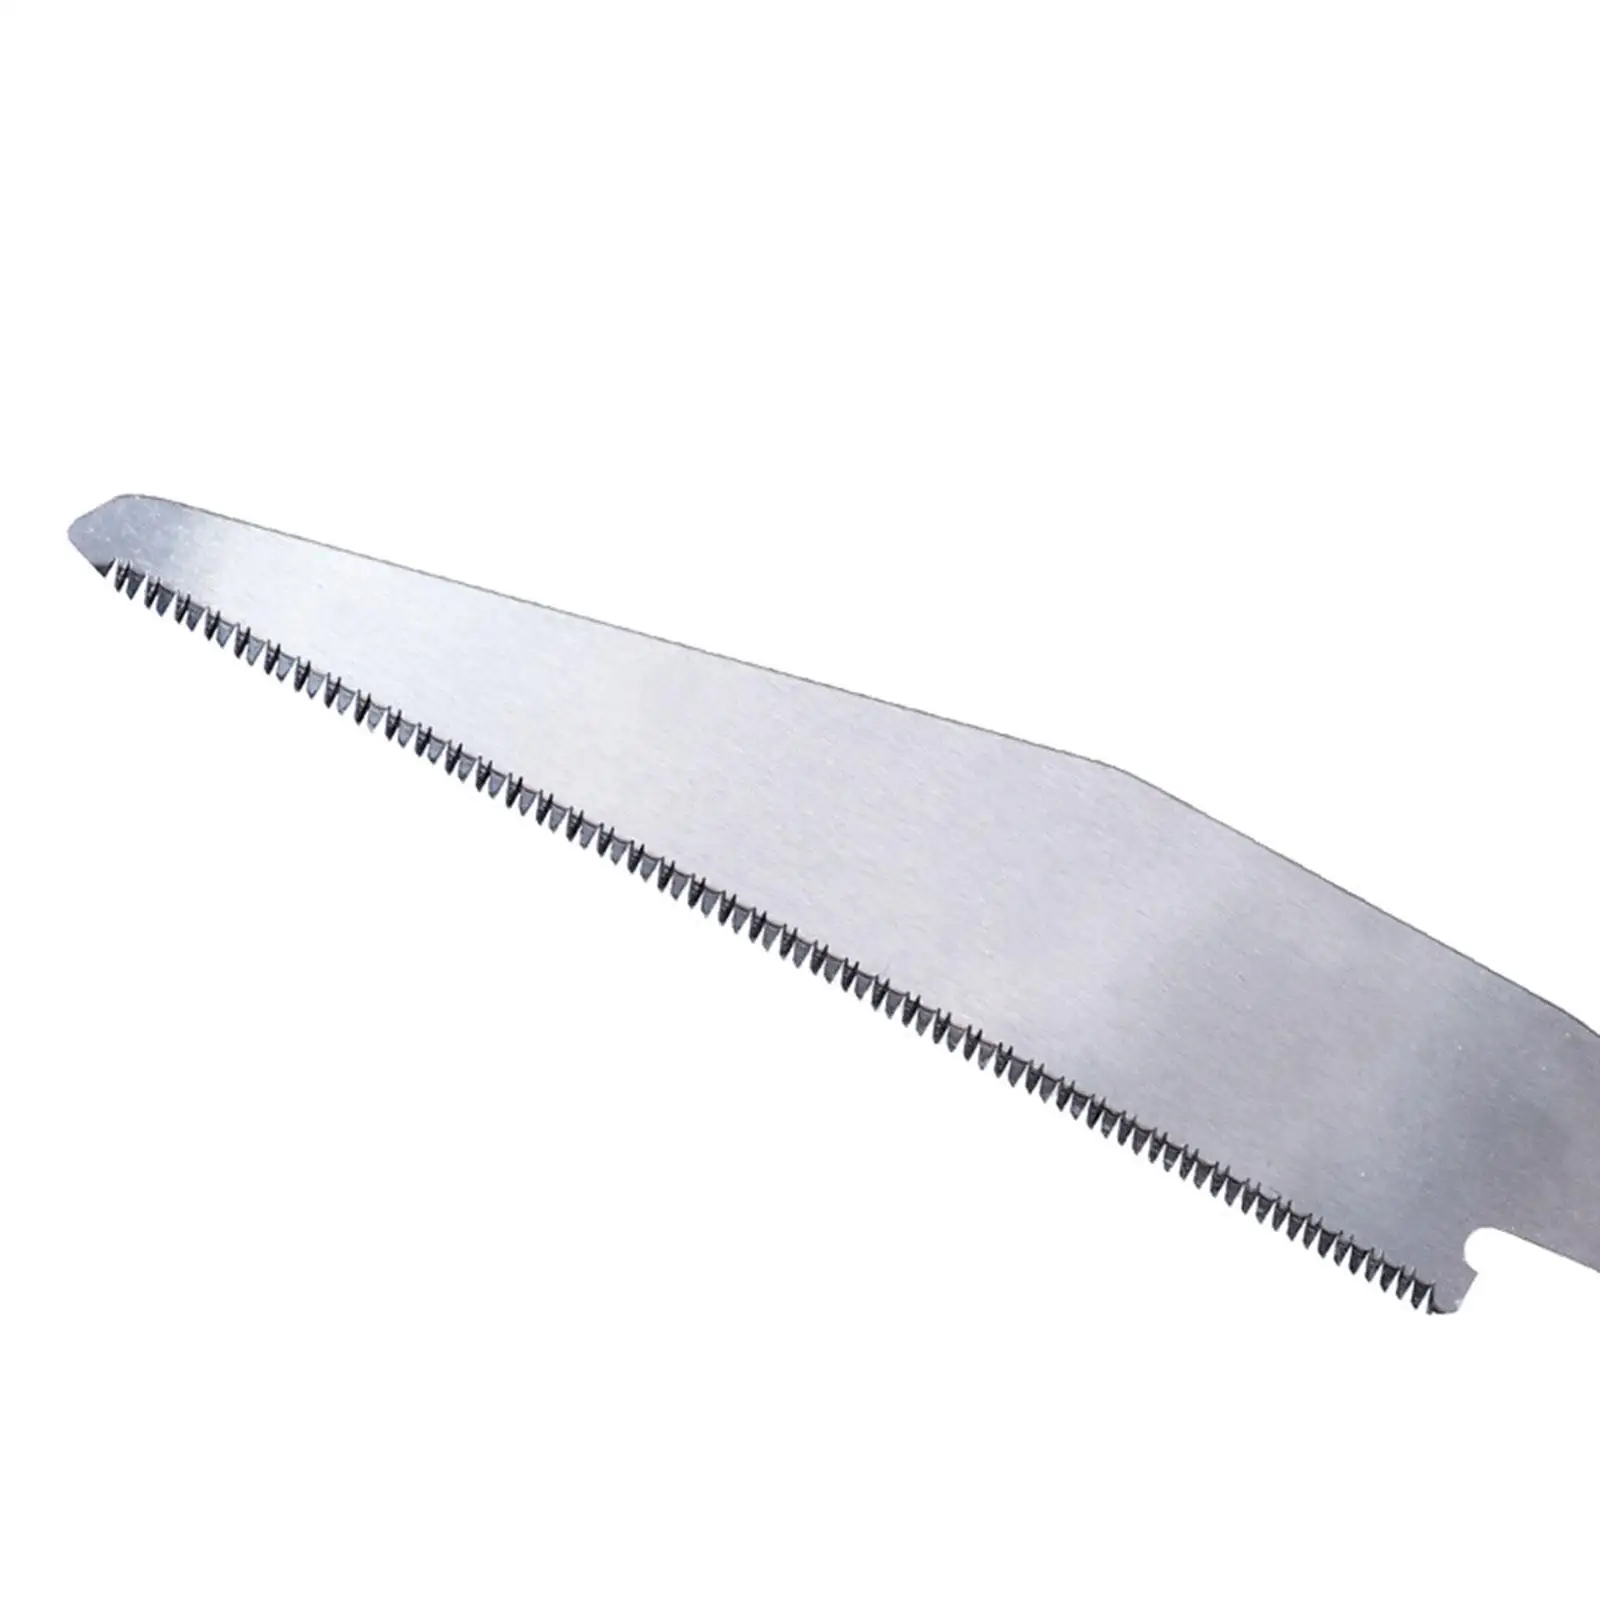 Professional Pruning Saw Household Small Hand Saw for Hunting Gardening